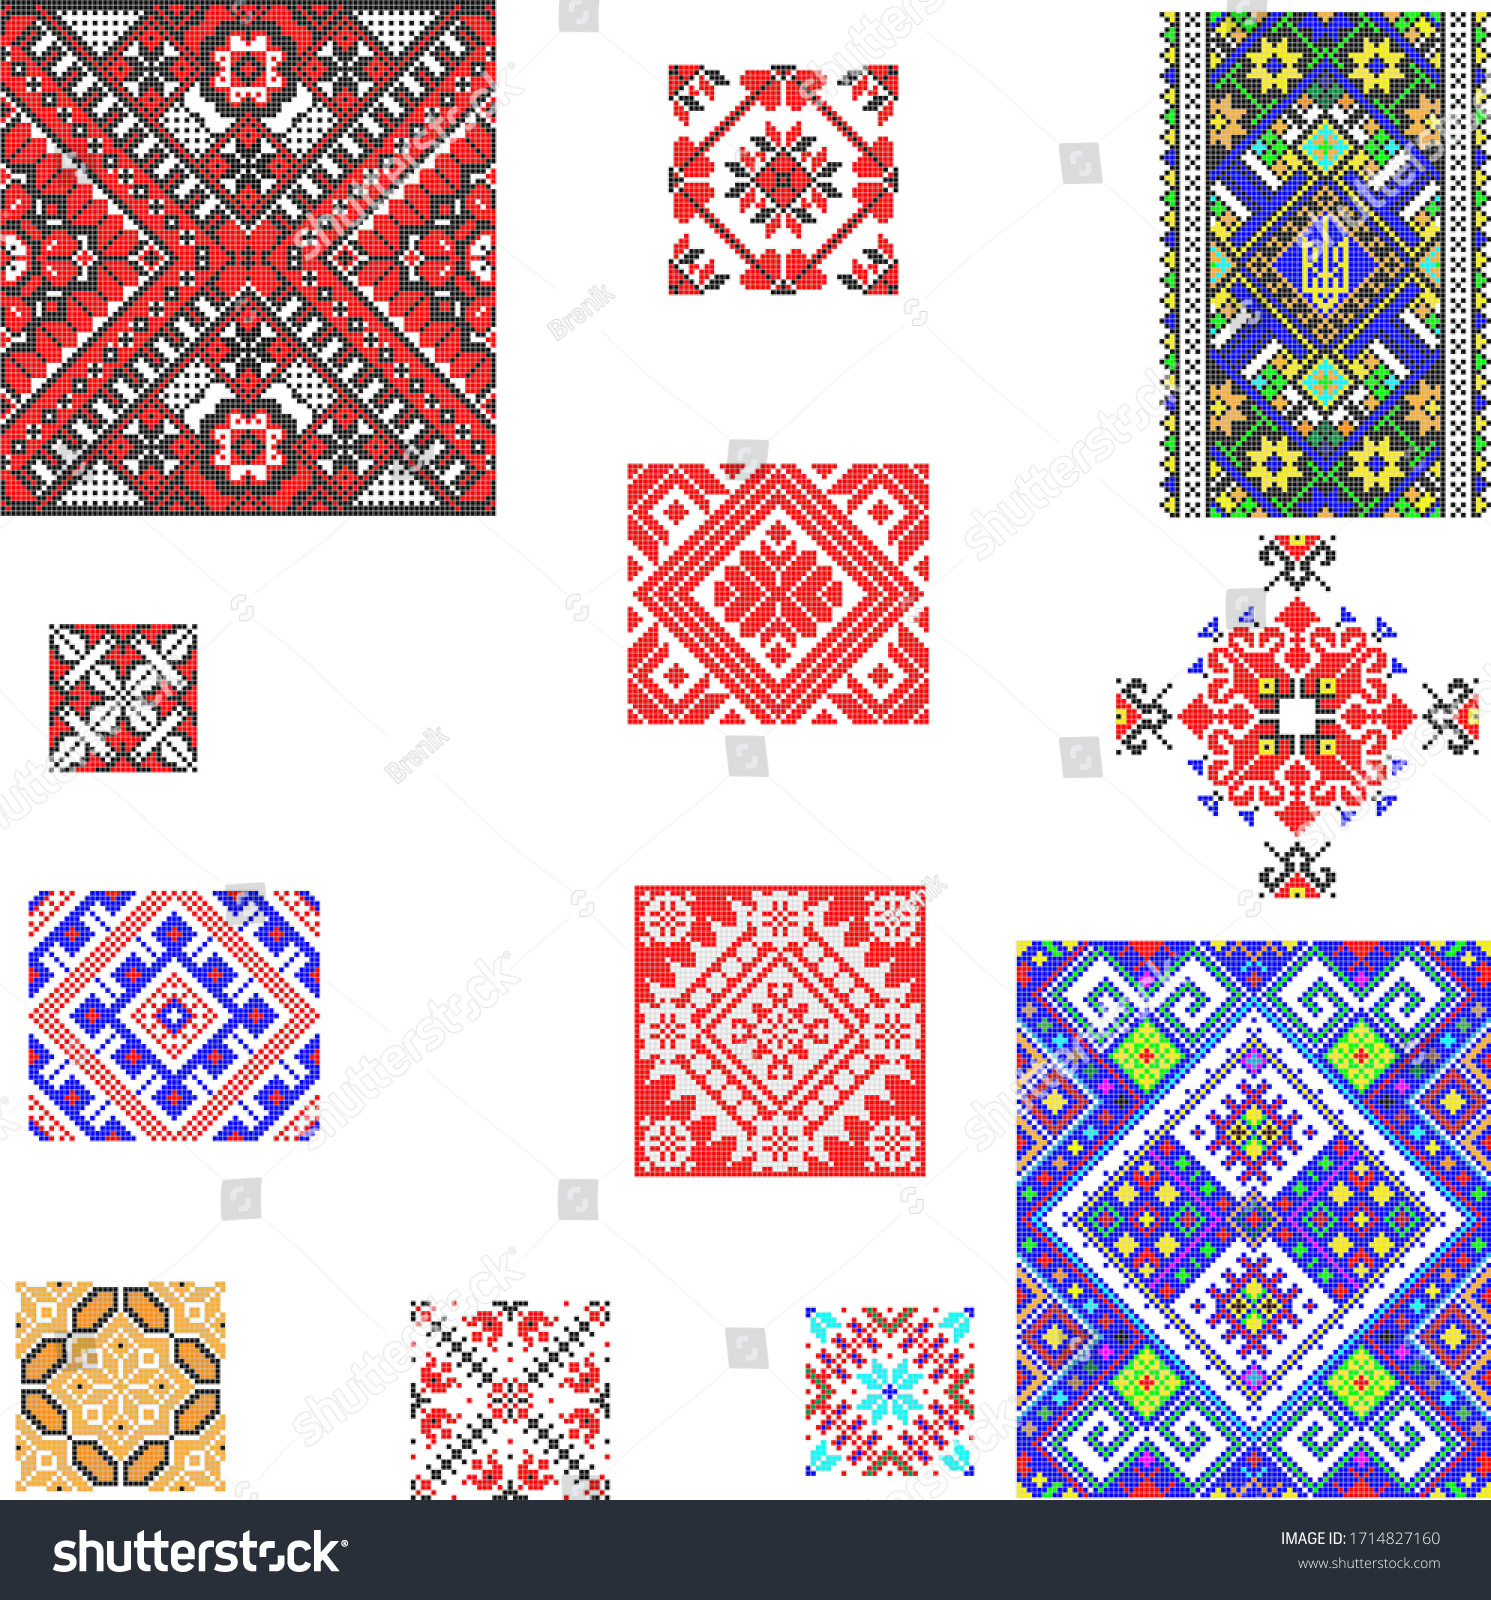 SVG of Element traditional Romanian folk art knitted embroidery pattern svg